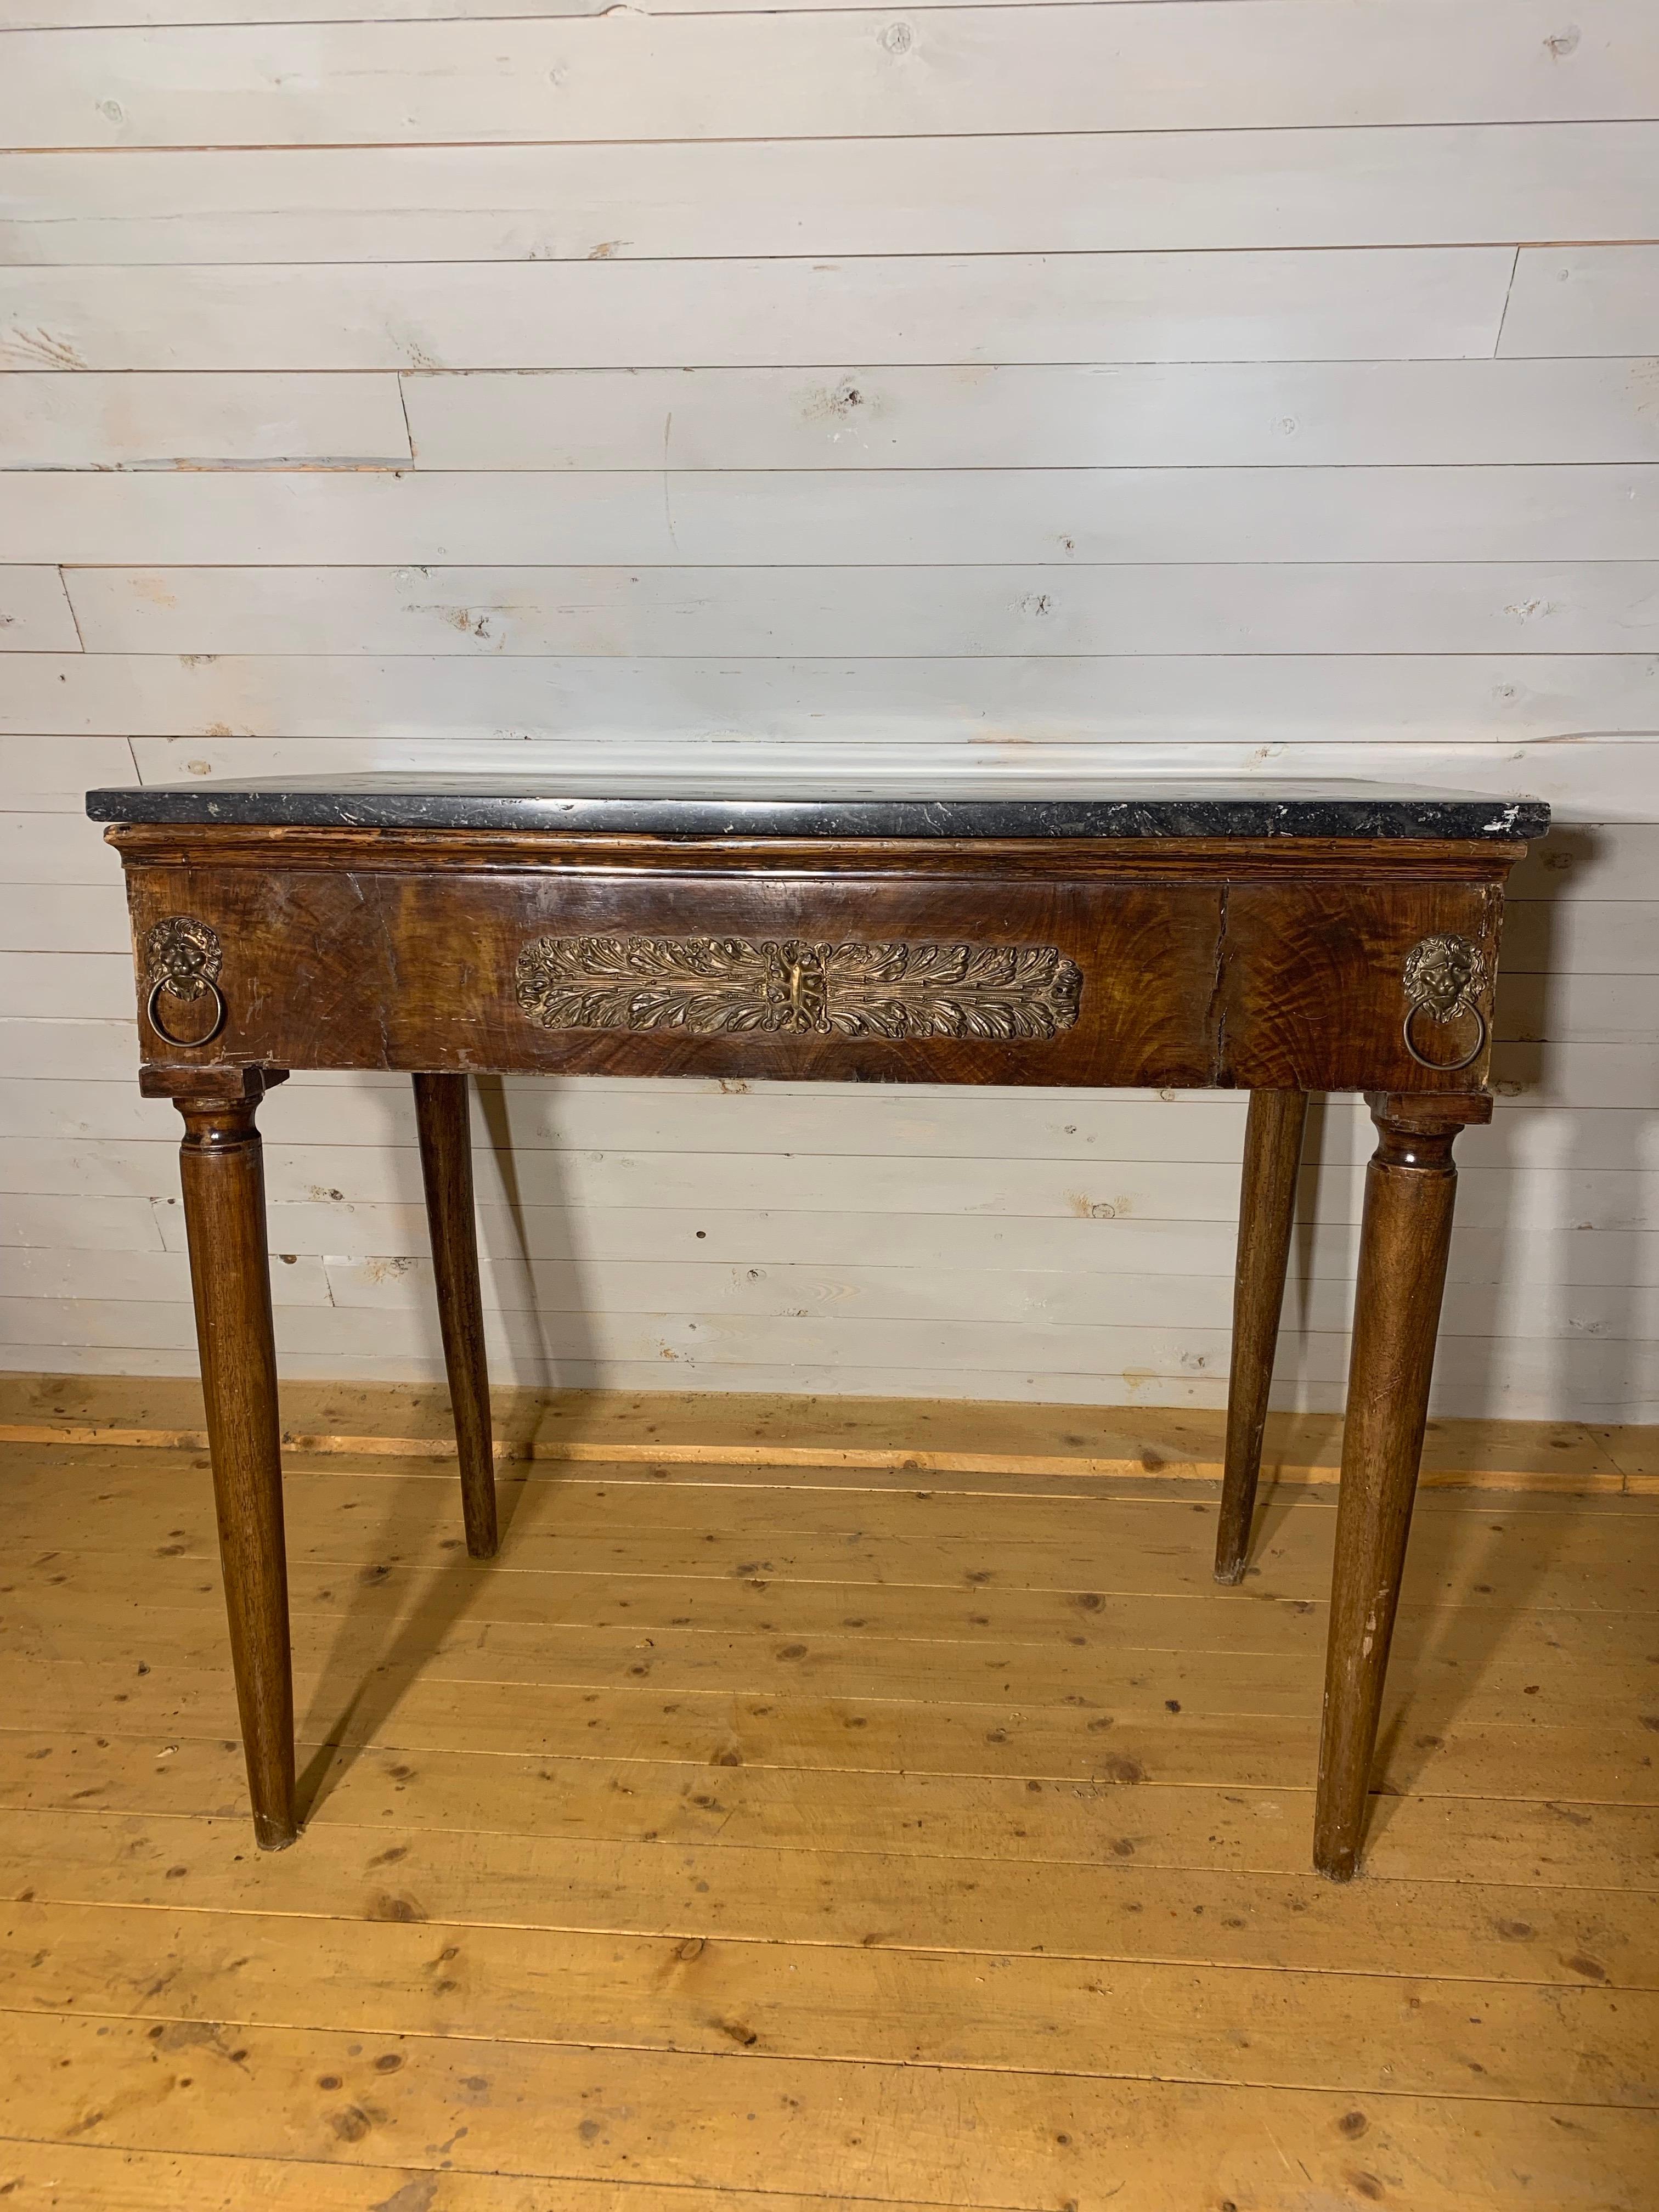 A console table in mahogany and brass decoration in the front. 
The table is made in France during Charles X - period. 
The mahogany has a beautiful aged color with nice patina. On the top there is a black marble stone .

The pair of candlesticks